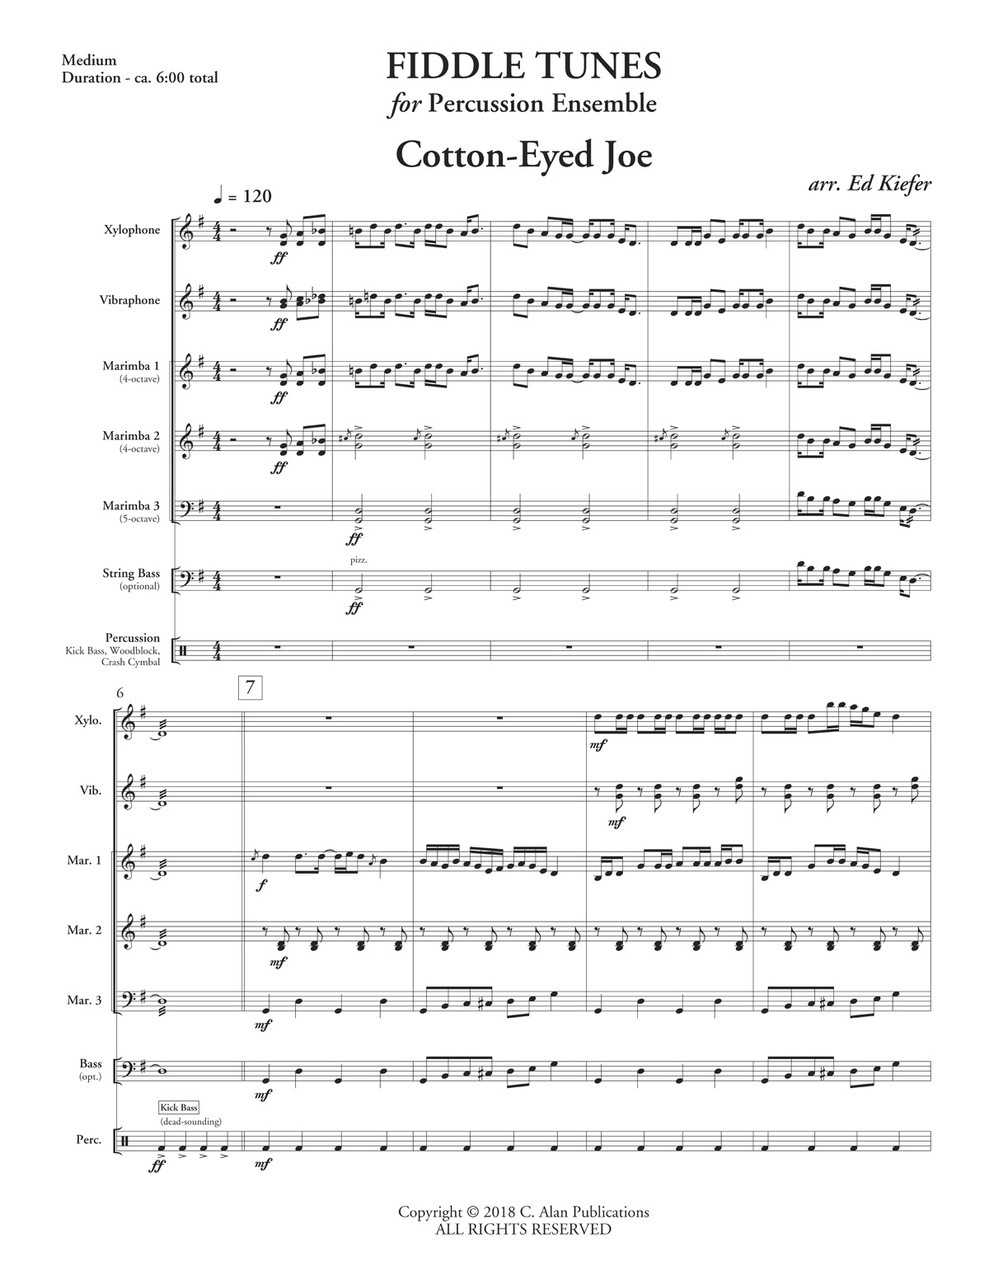 Fiddle Tunes for Percussion Ensemble by Ed Kiefer